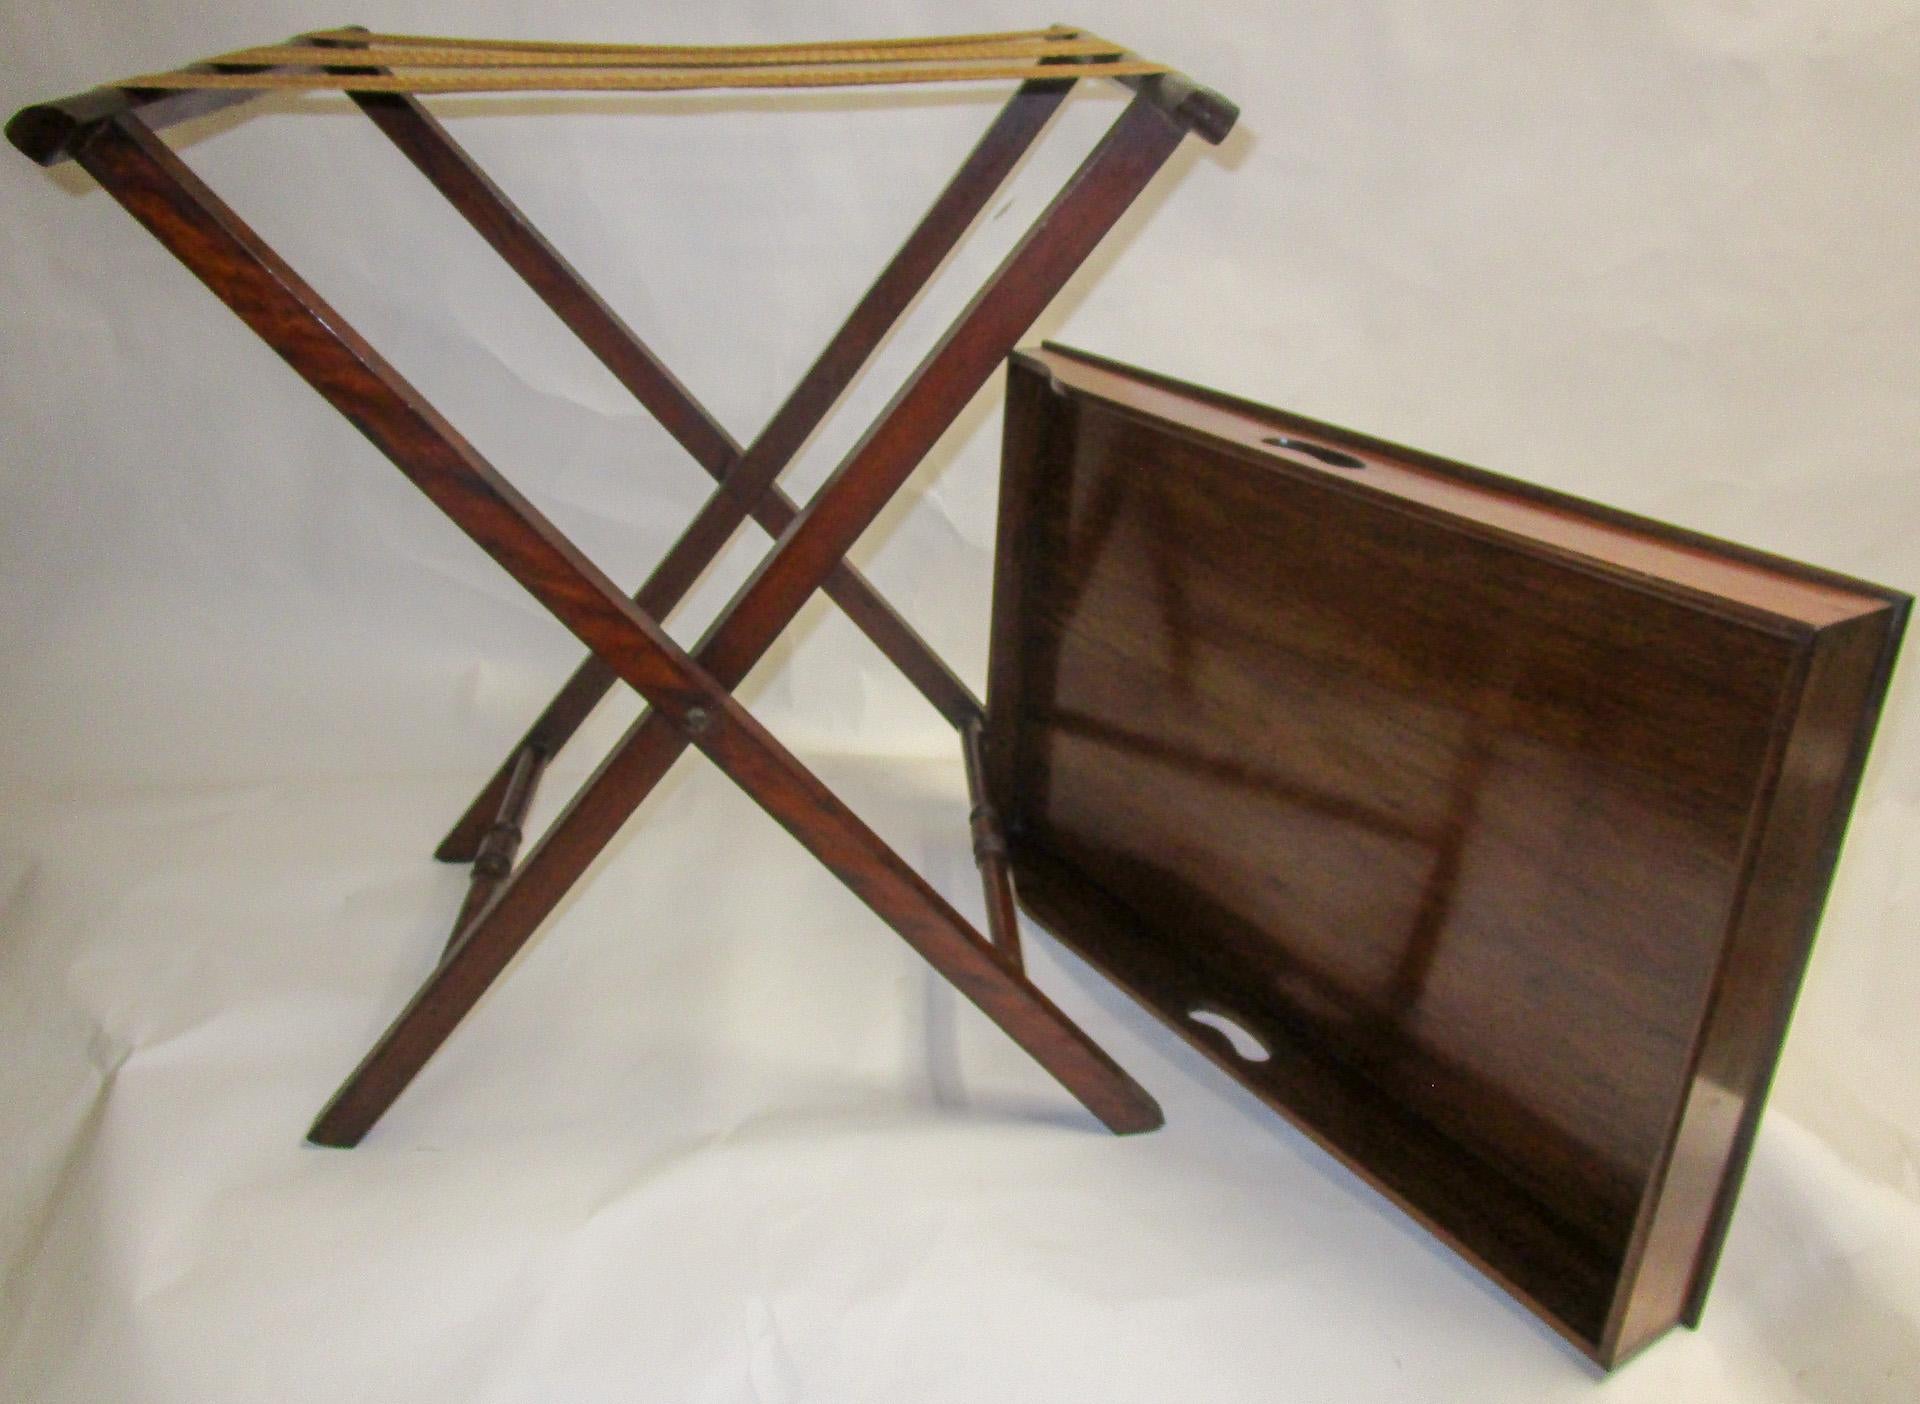 Regency period mahogany butlers tray on stand featuring a rectangular shaped tray with surround gallery. A slight slope terminates to one side with handles on either side. On folding X-frame stand with heavy woven straps to accommodate the tray.